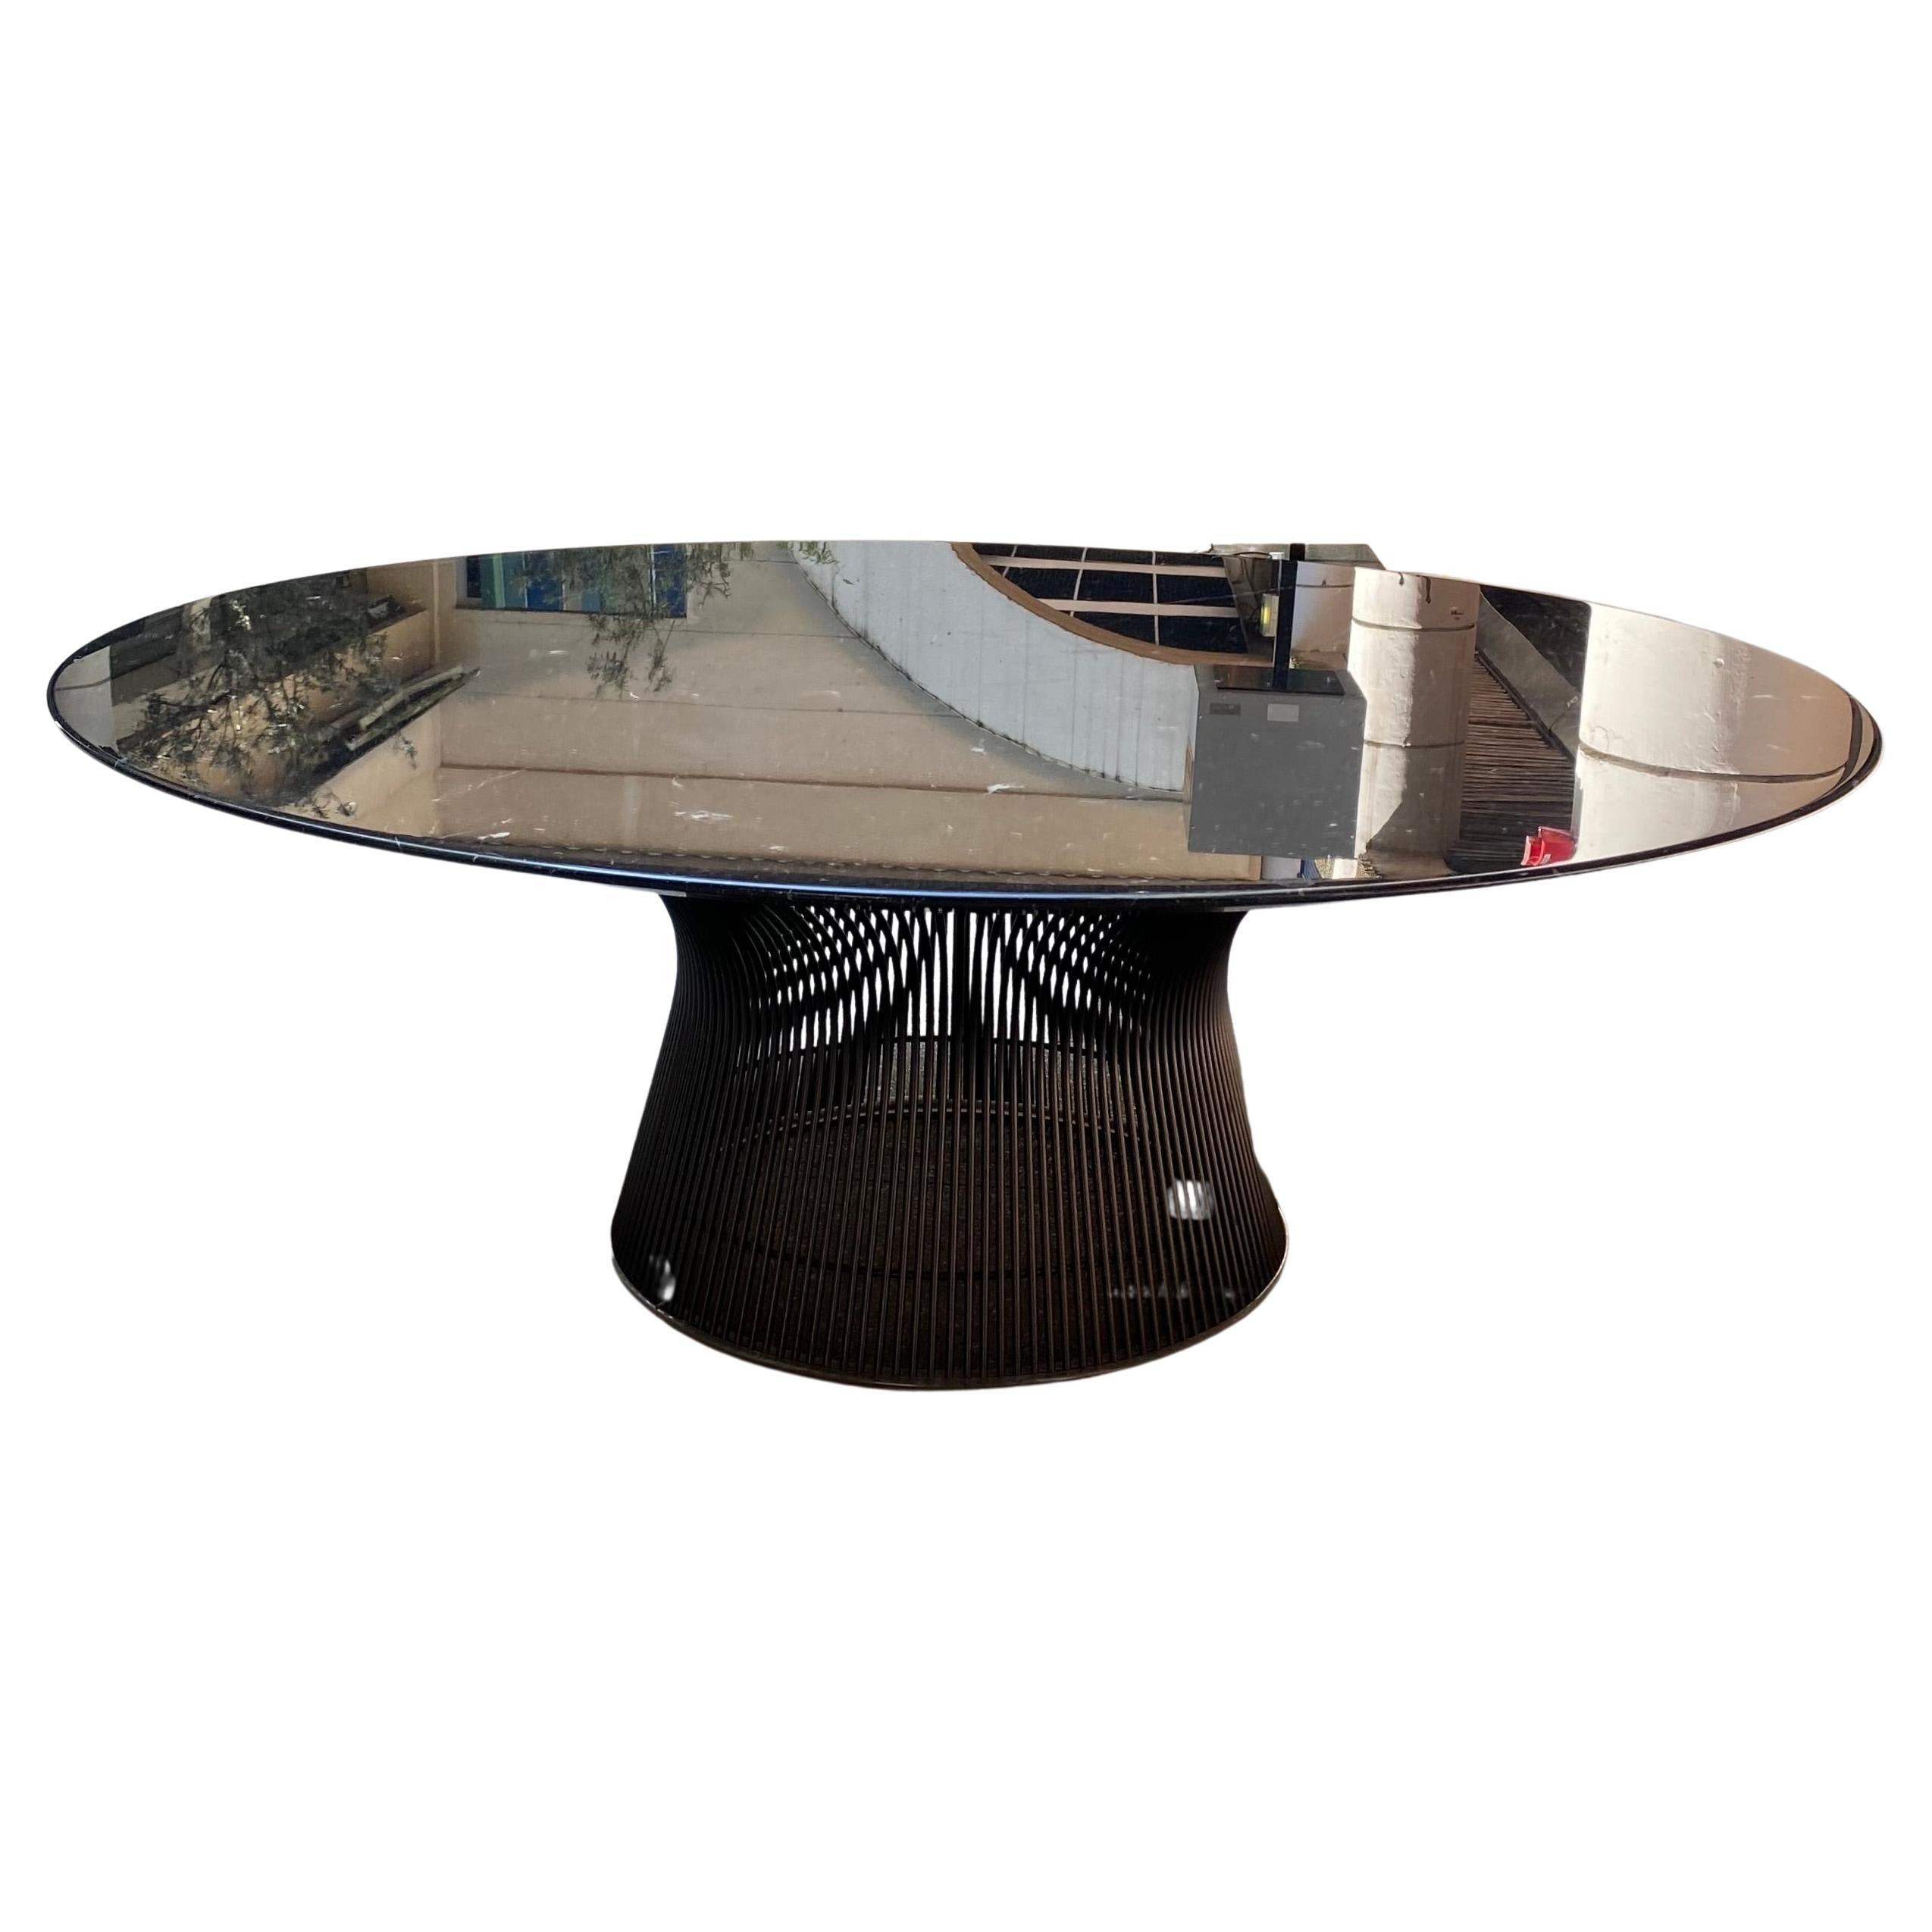 Magnificent coffee table by Warren Platner

Marquina marble
Limited edition Knoll - Finition métal bronze
Attribution mark under the top
Bronze and marble
2020
Dimensions : ø 107 cm x h 40 cm

Ref:
Price : 3200€.